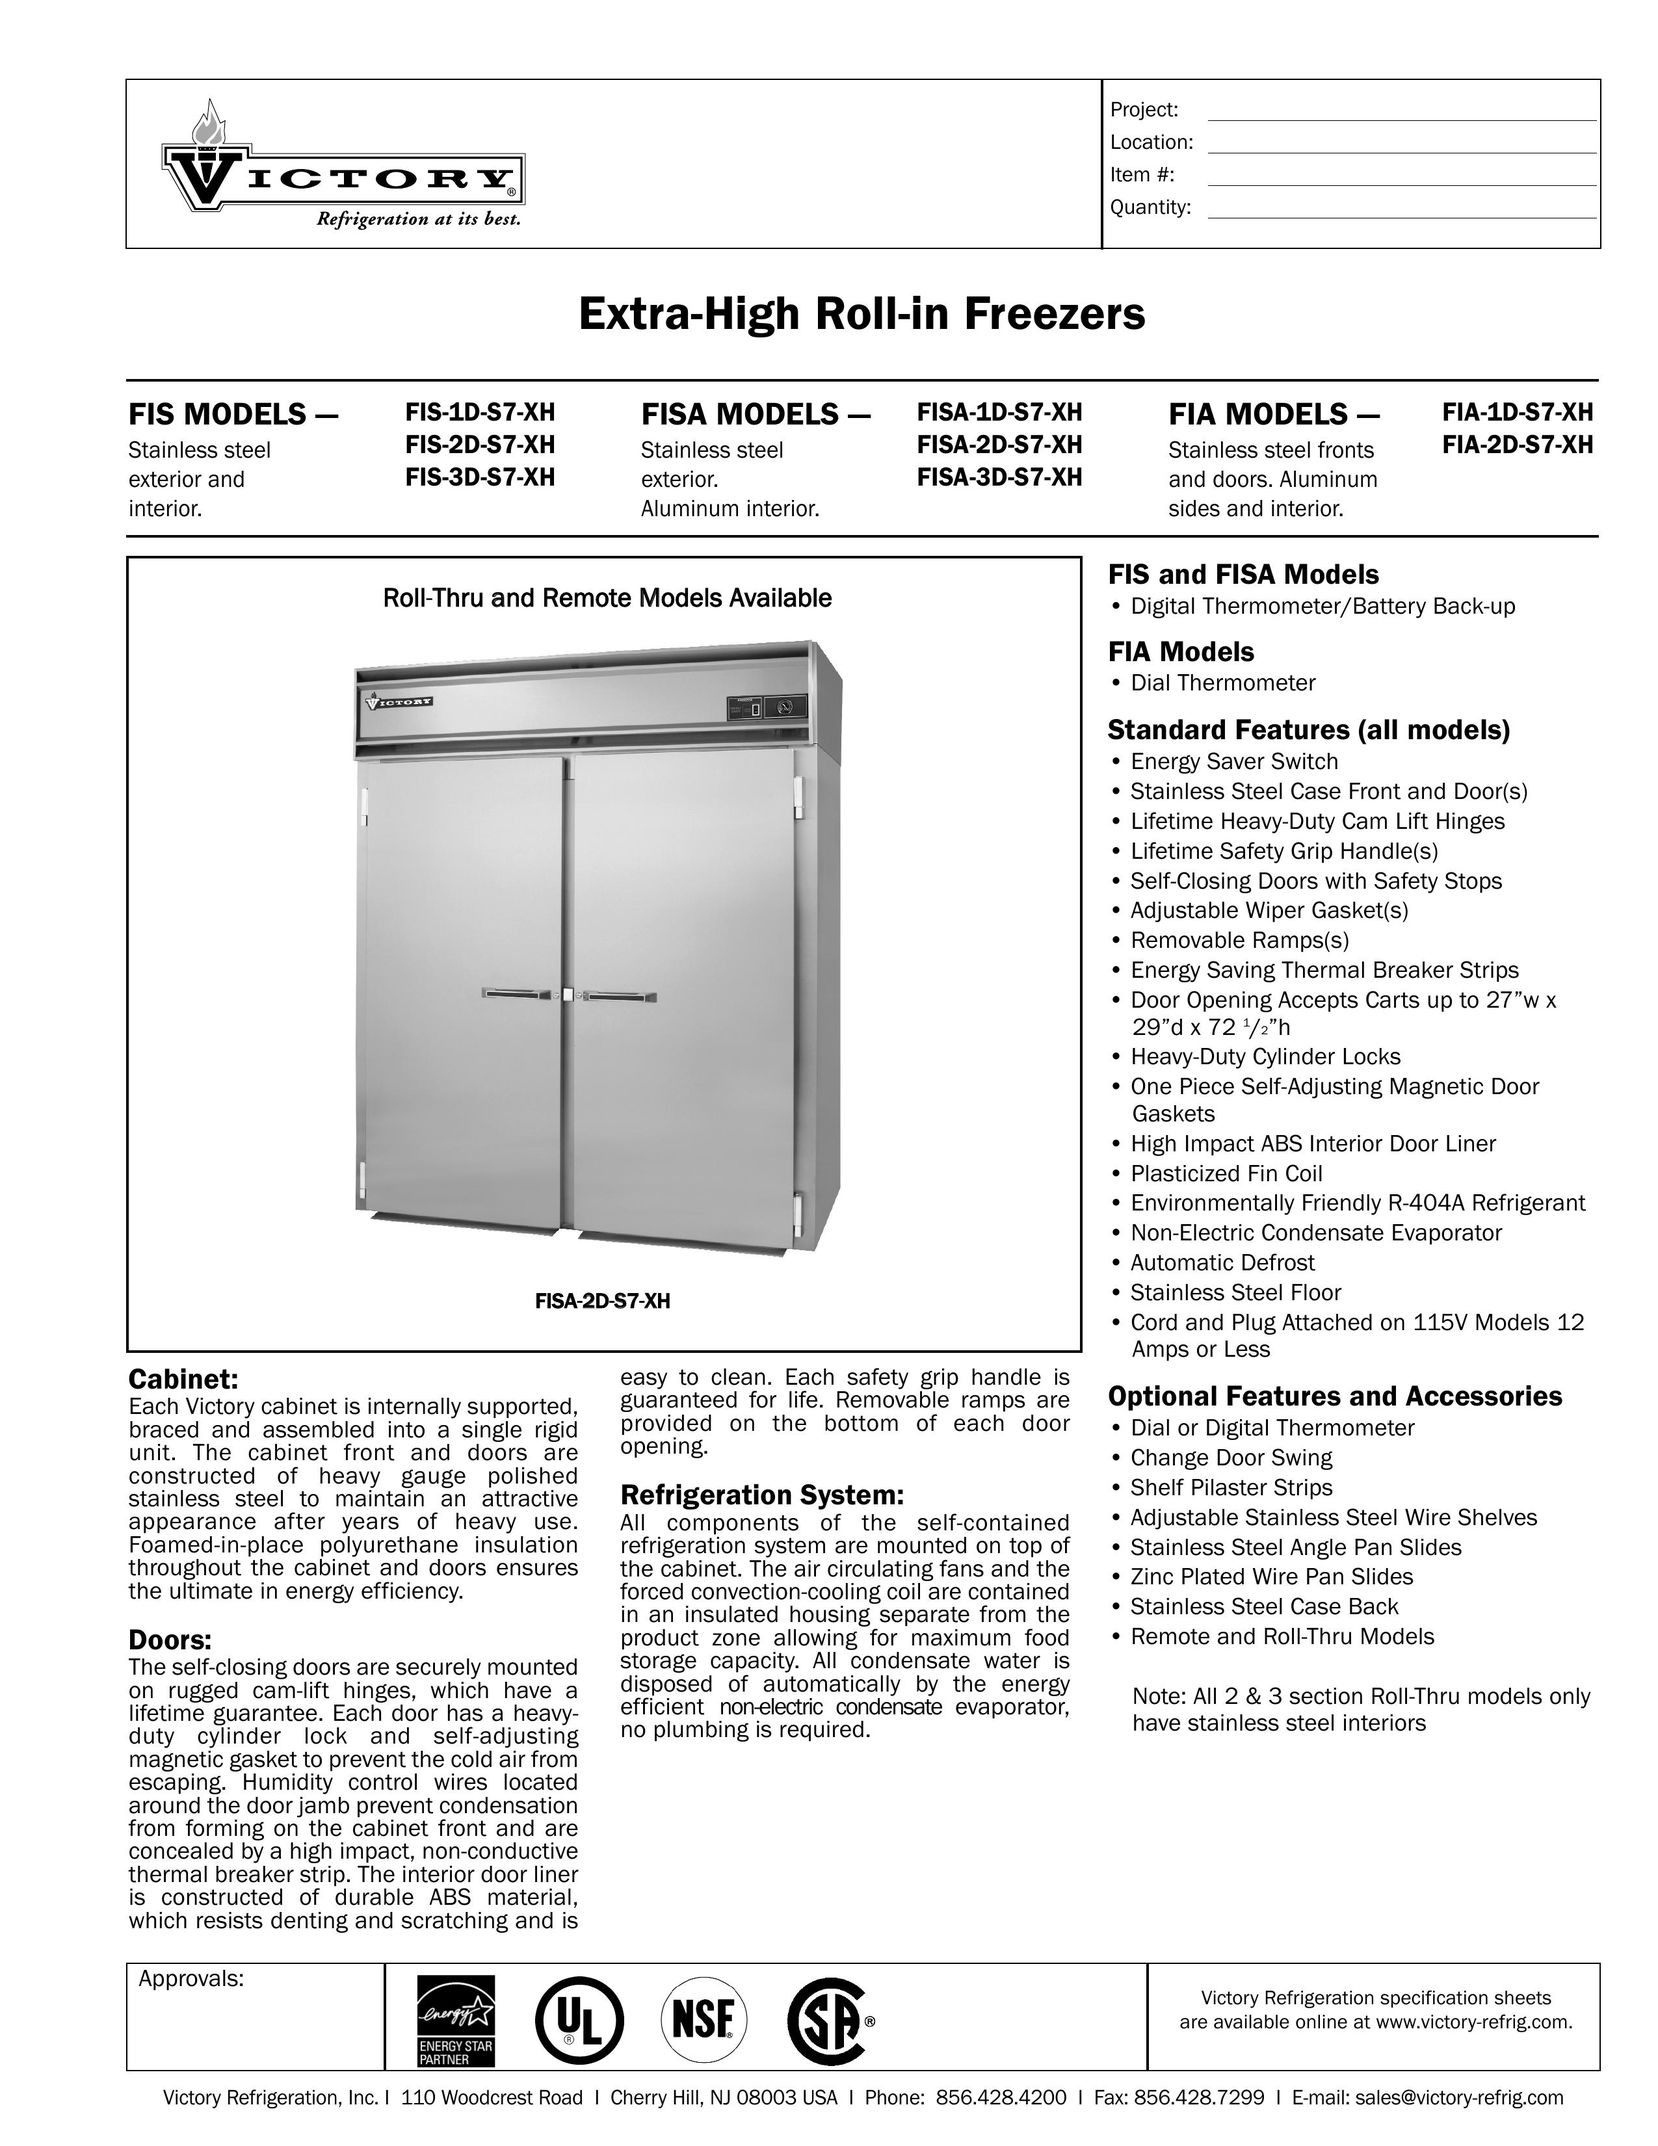 Victory Refrigeration FIS-1D-S7-XH Freezer User Manual